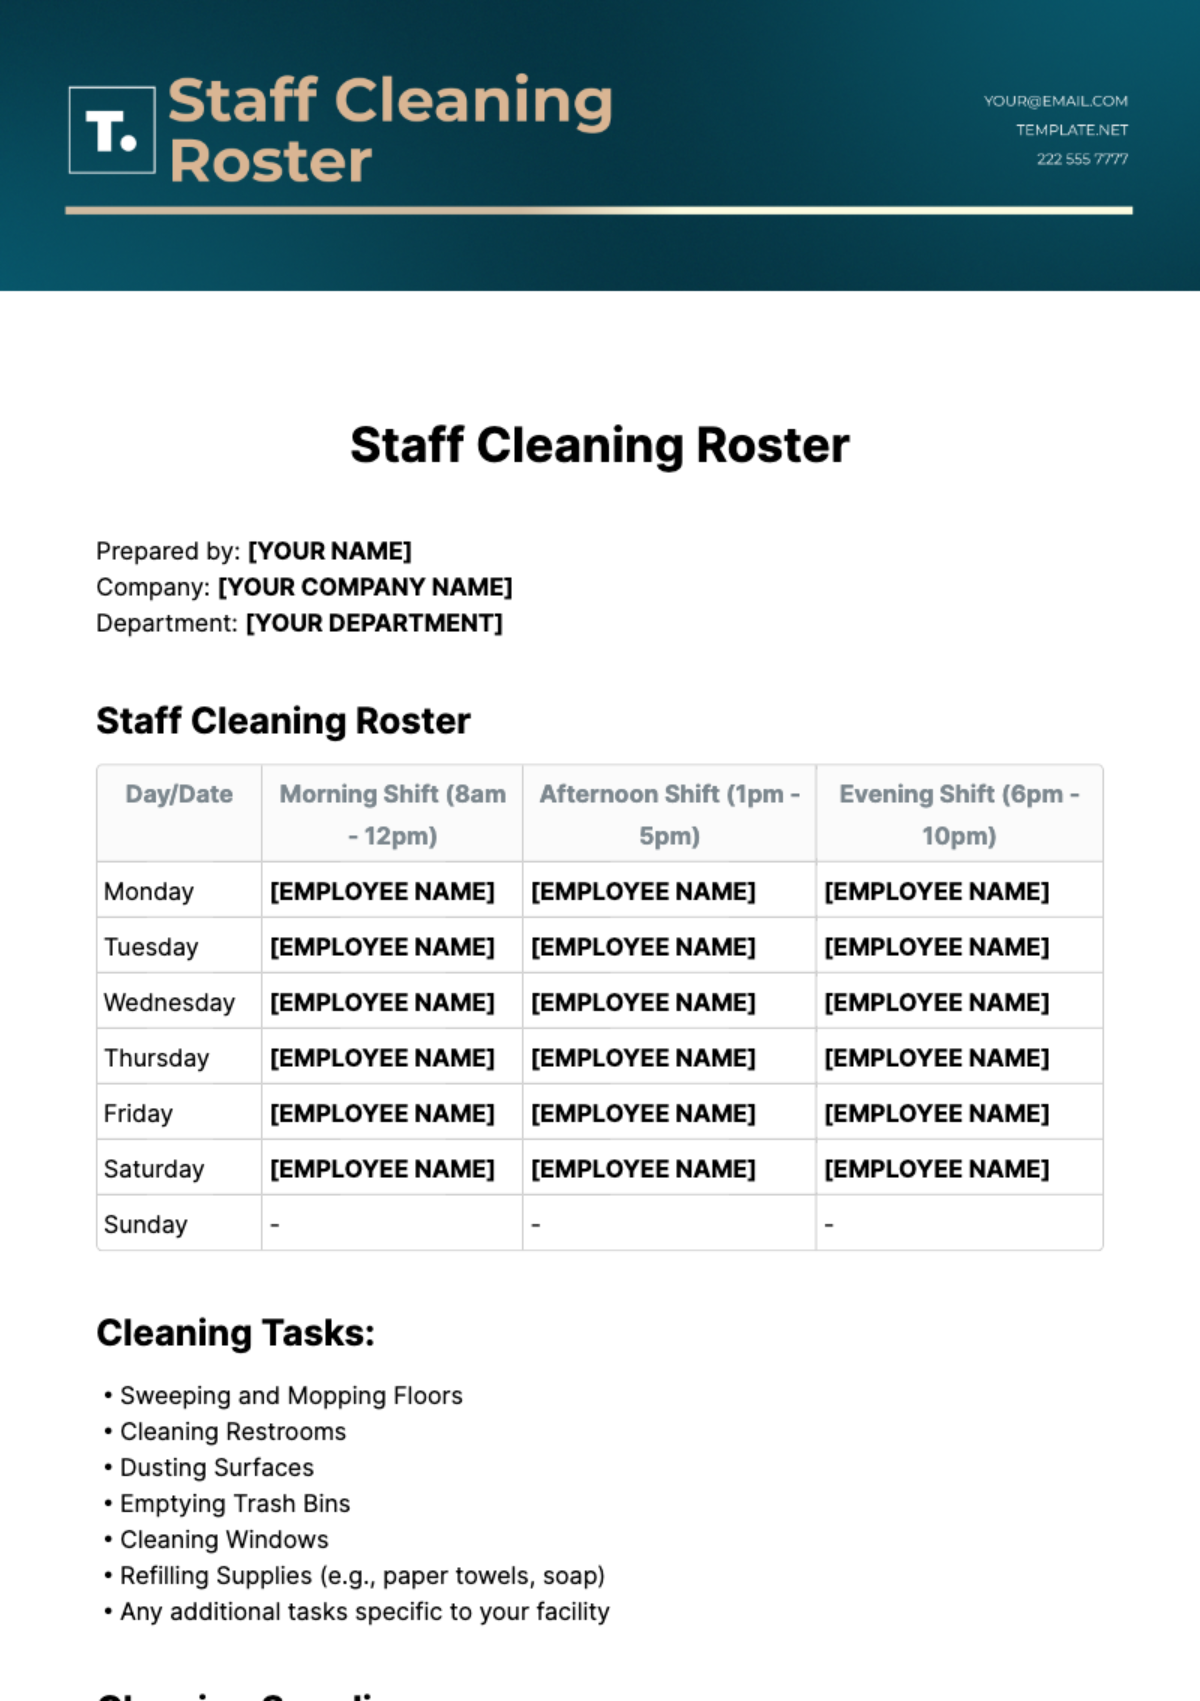 Staff Cleaning Roster Template